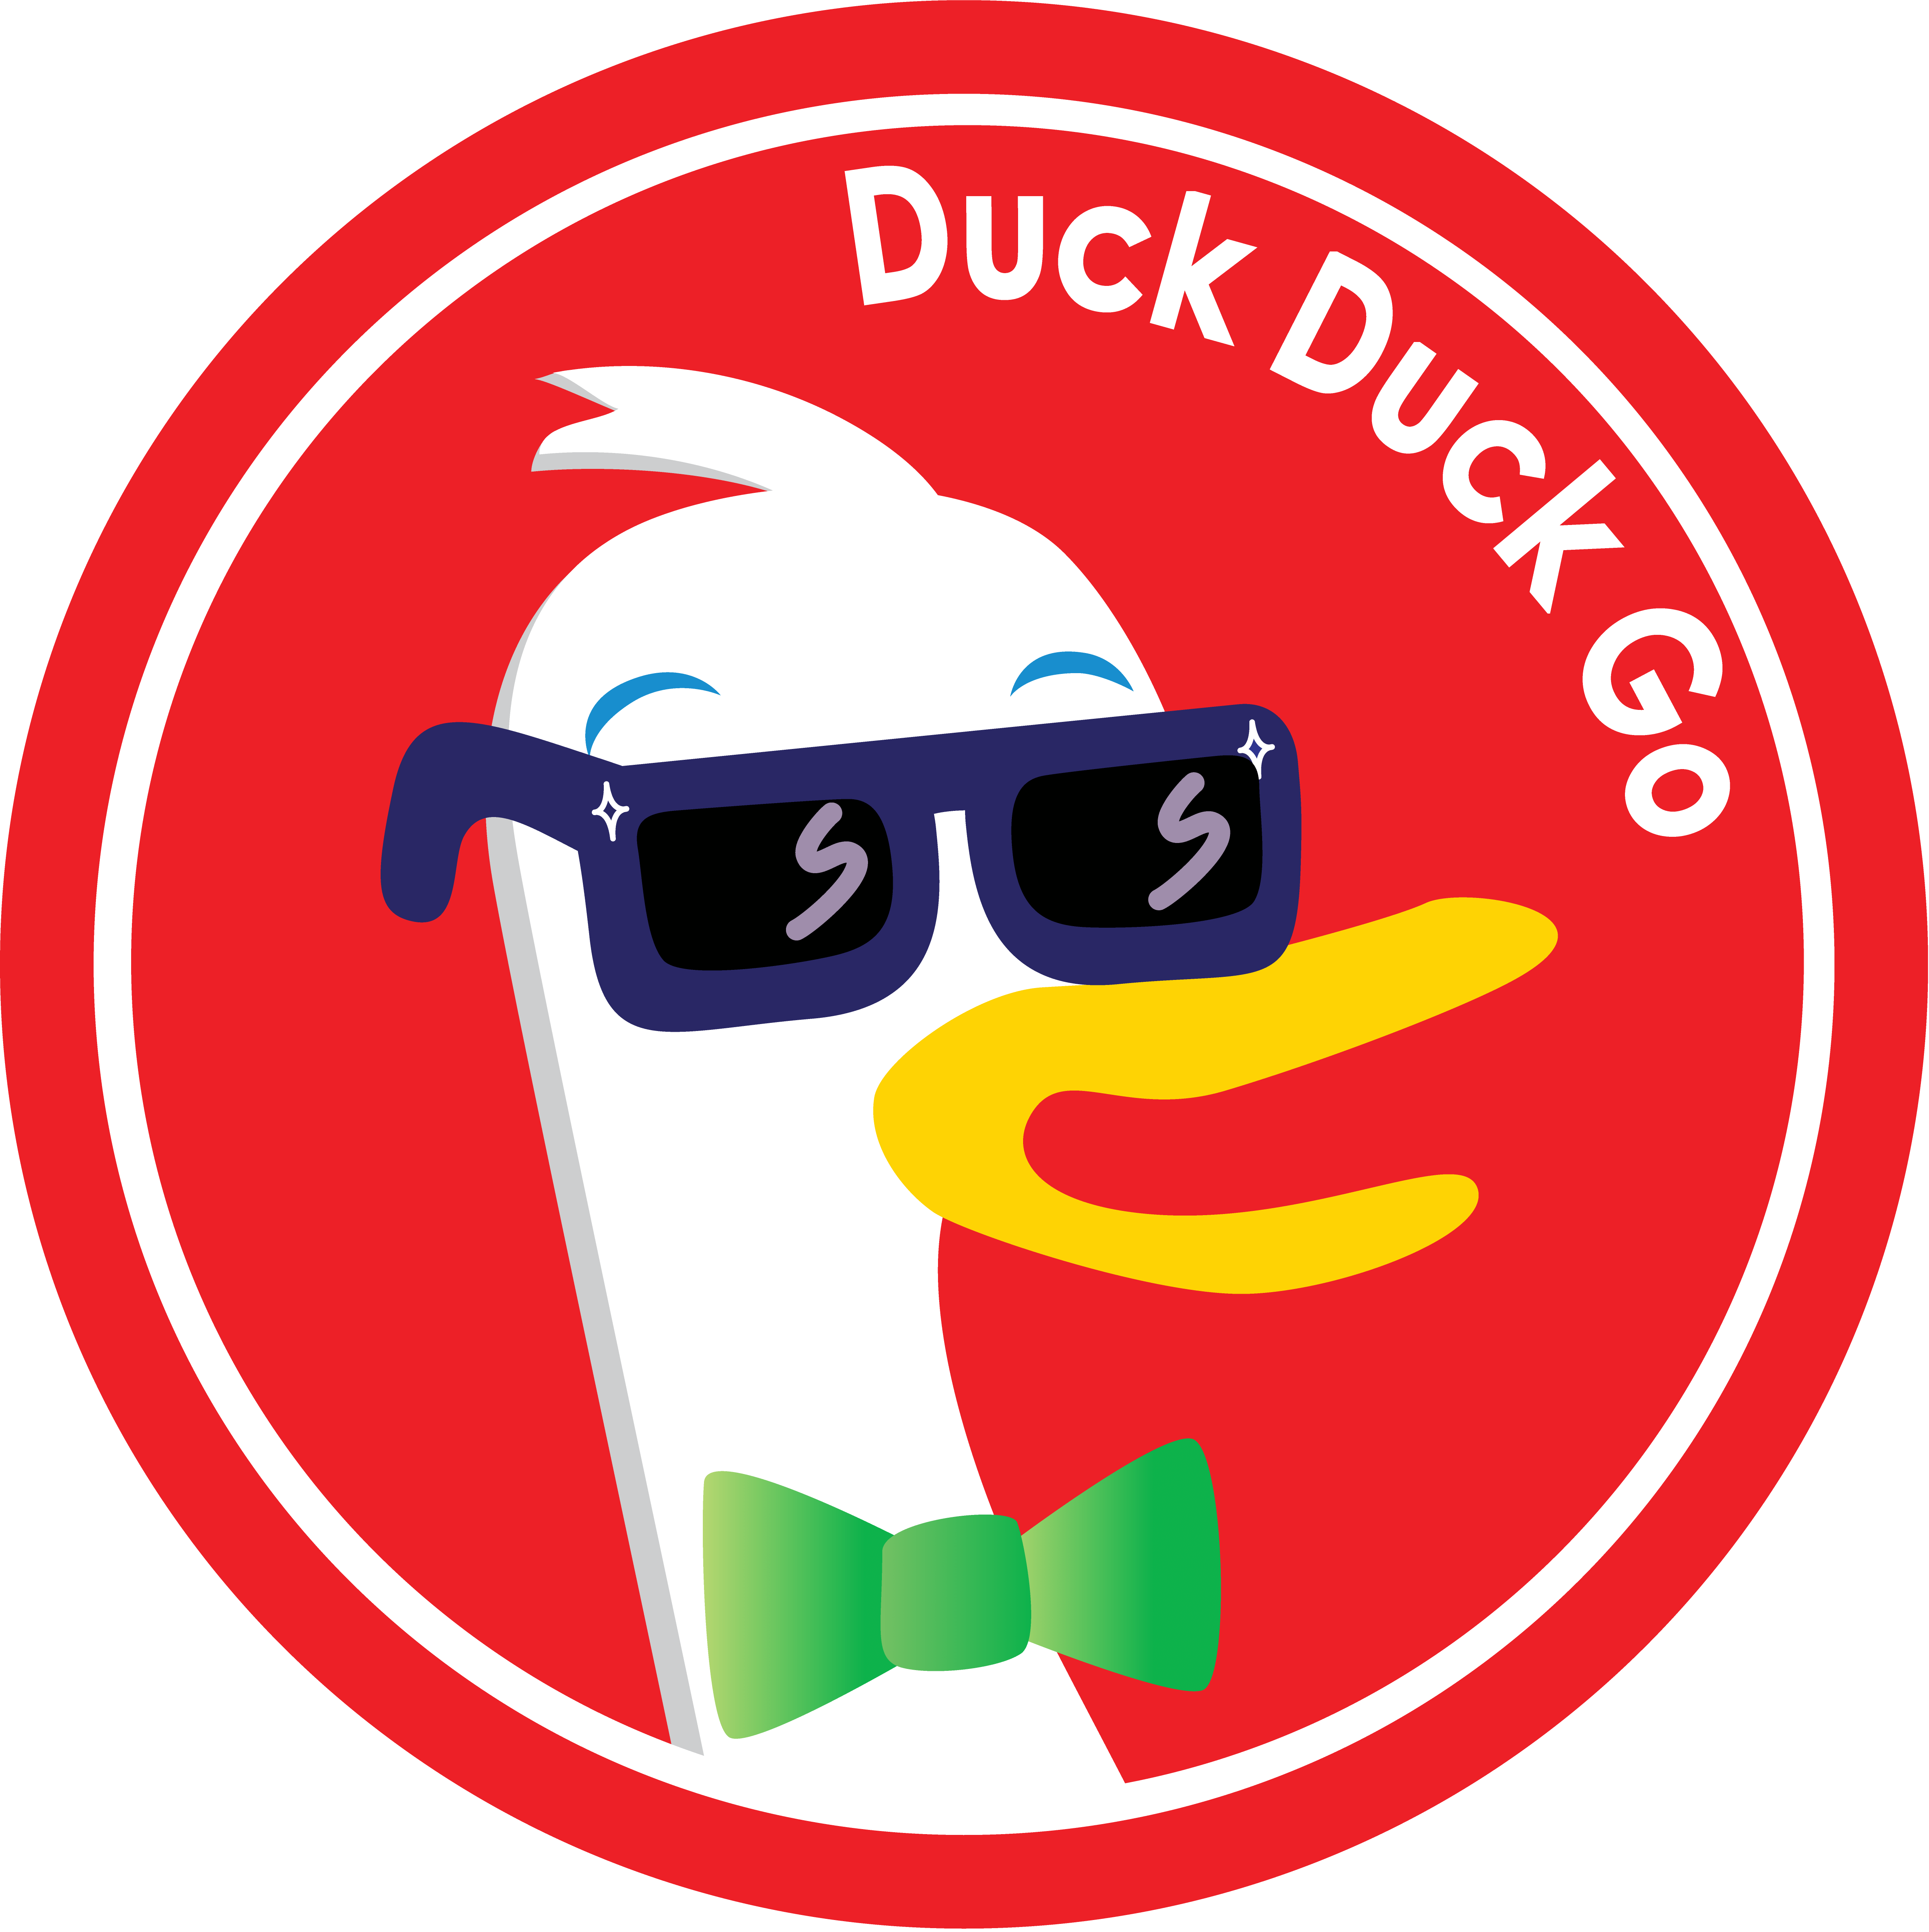 DuckDuckGo Logo - DuckDuckGo, The PRISM-Proof Search Engine That the NSA Just Can't ...